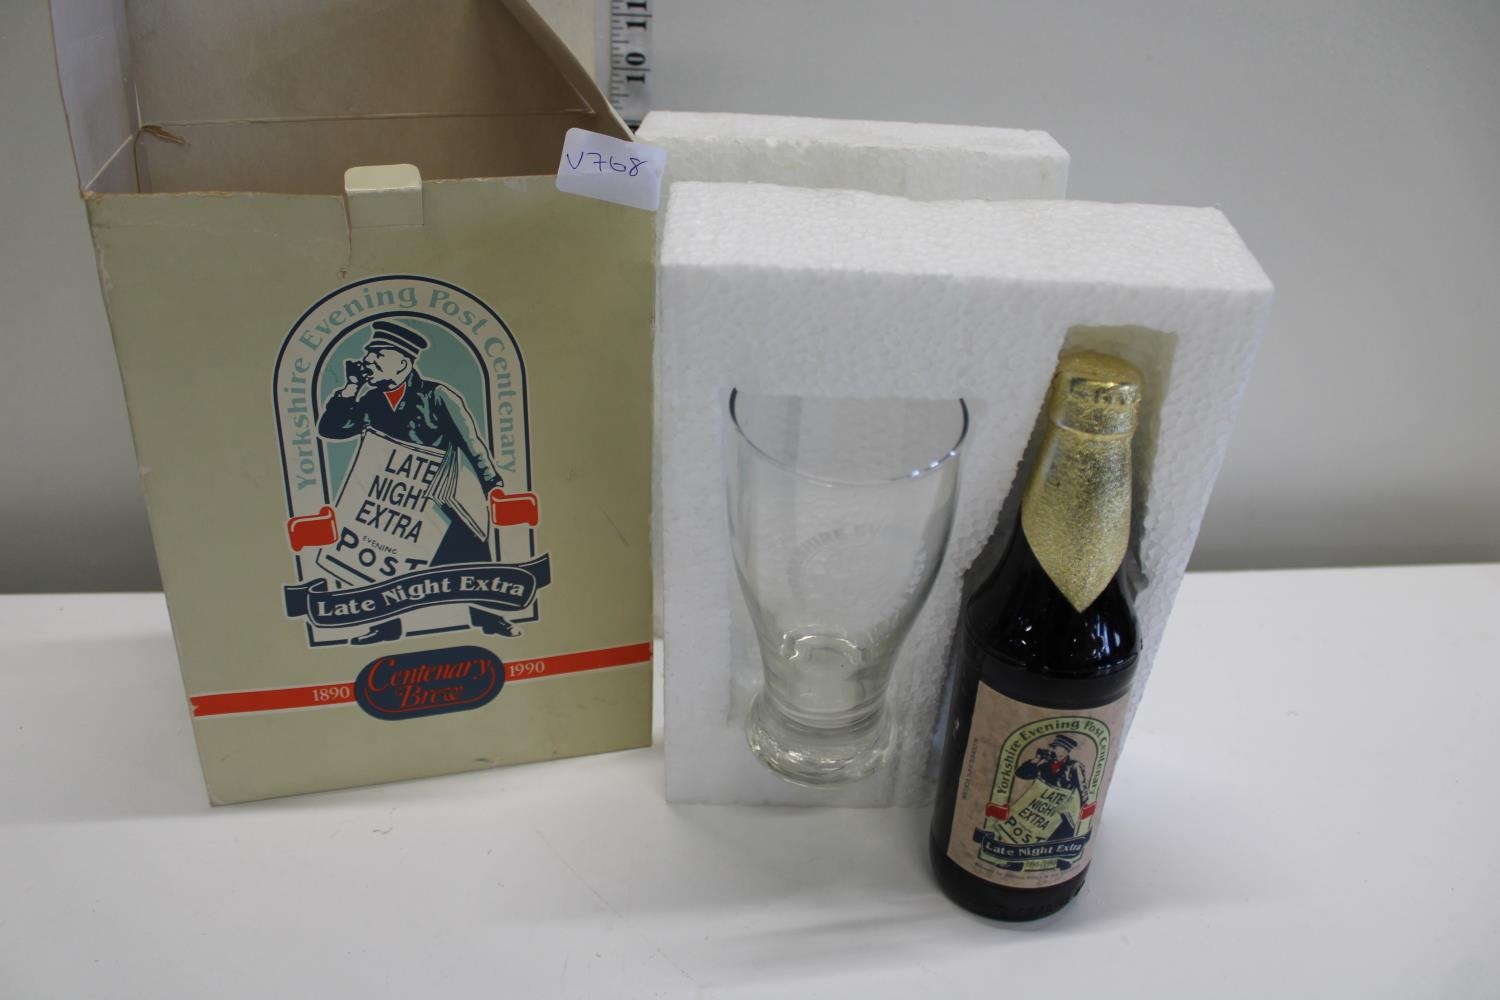 A bottle and glass set celebrating 100 years of the Yorkshire Evening Post